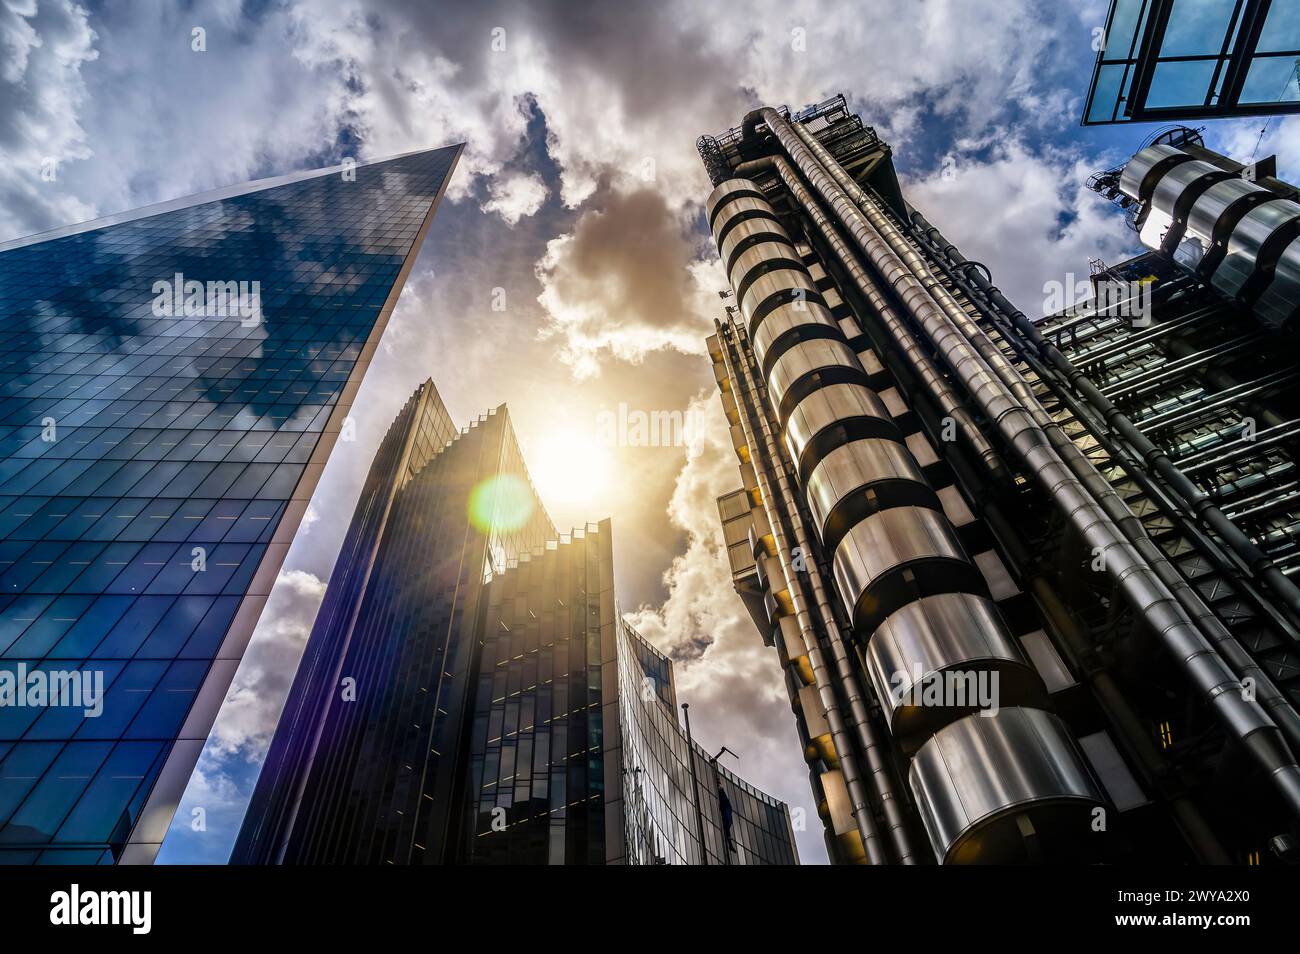 The Lloyd's building in the main financial district of the City of London, London, England. Stock Photo